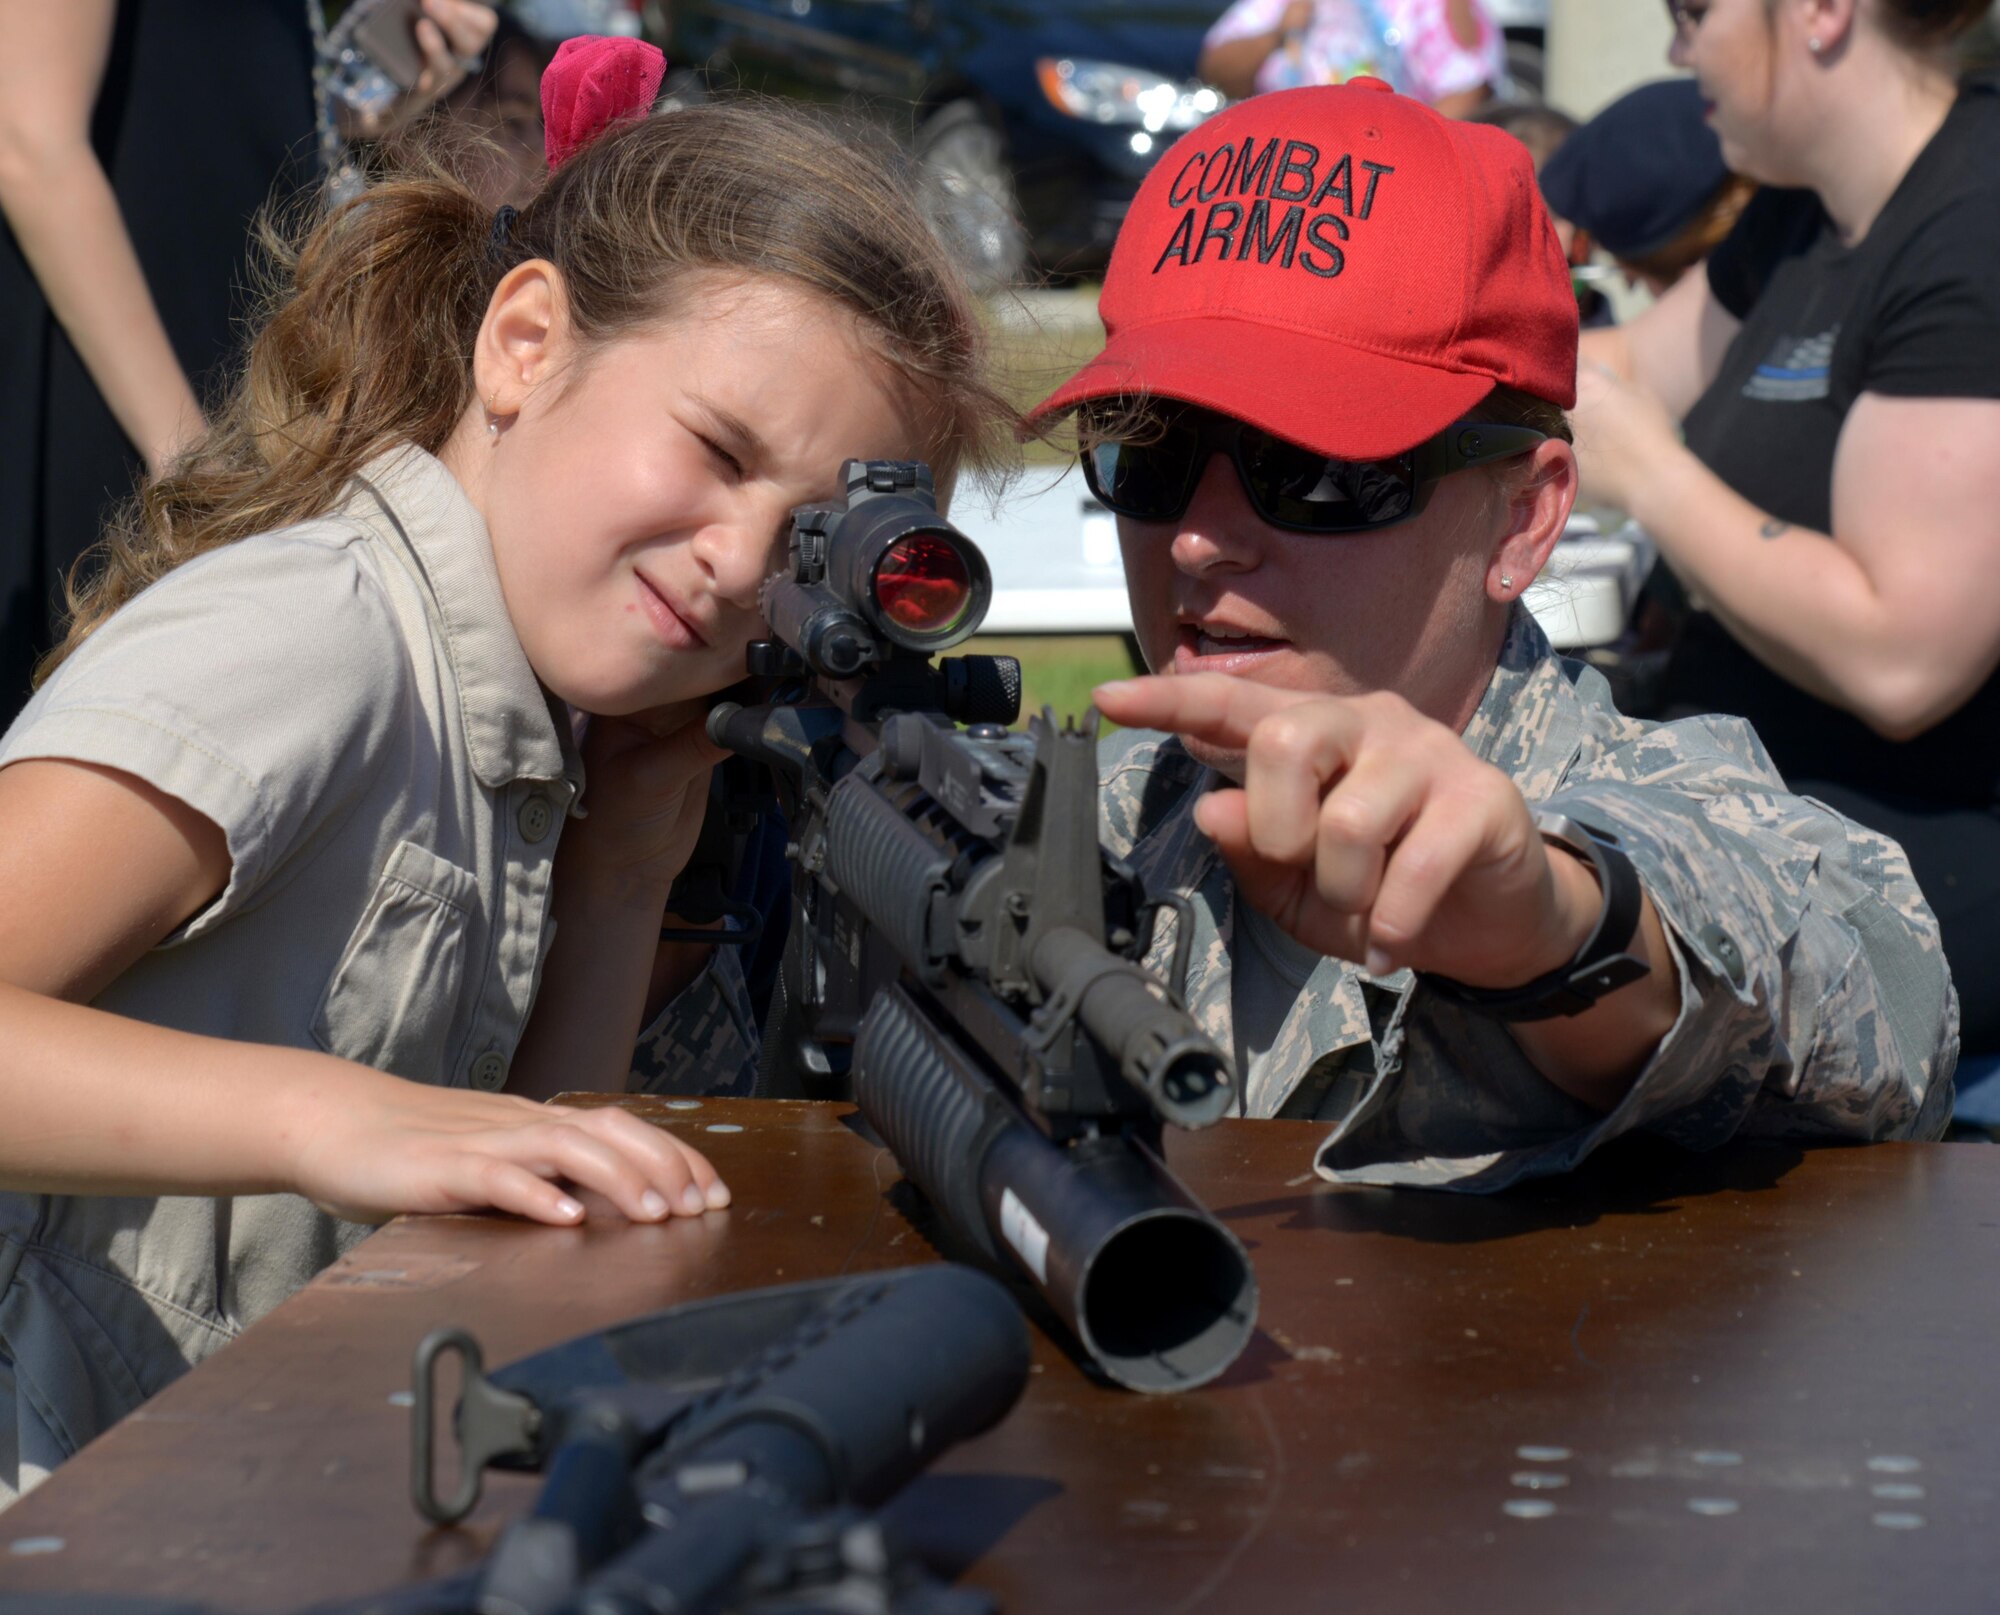 U.S. Air Force Tech. Sgt. Nicole Ogilvie, NCO in charge of combat arms training and maintenance assigned to the 6th Security Forces Squadron (SFS), teaches a Tinker Elementary School student to look through an M68 sight on an M4 carbine at MacDill Air Force Base, Fla., May 16, 2017. The 6th SFS celebrated National Police Week with multiple events to include setting up police displays for the students. (U.S. Air Force photo by Senior Airman Tori Long)